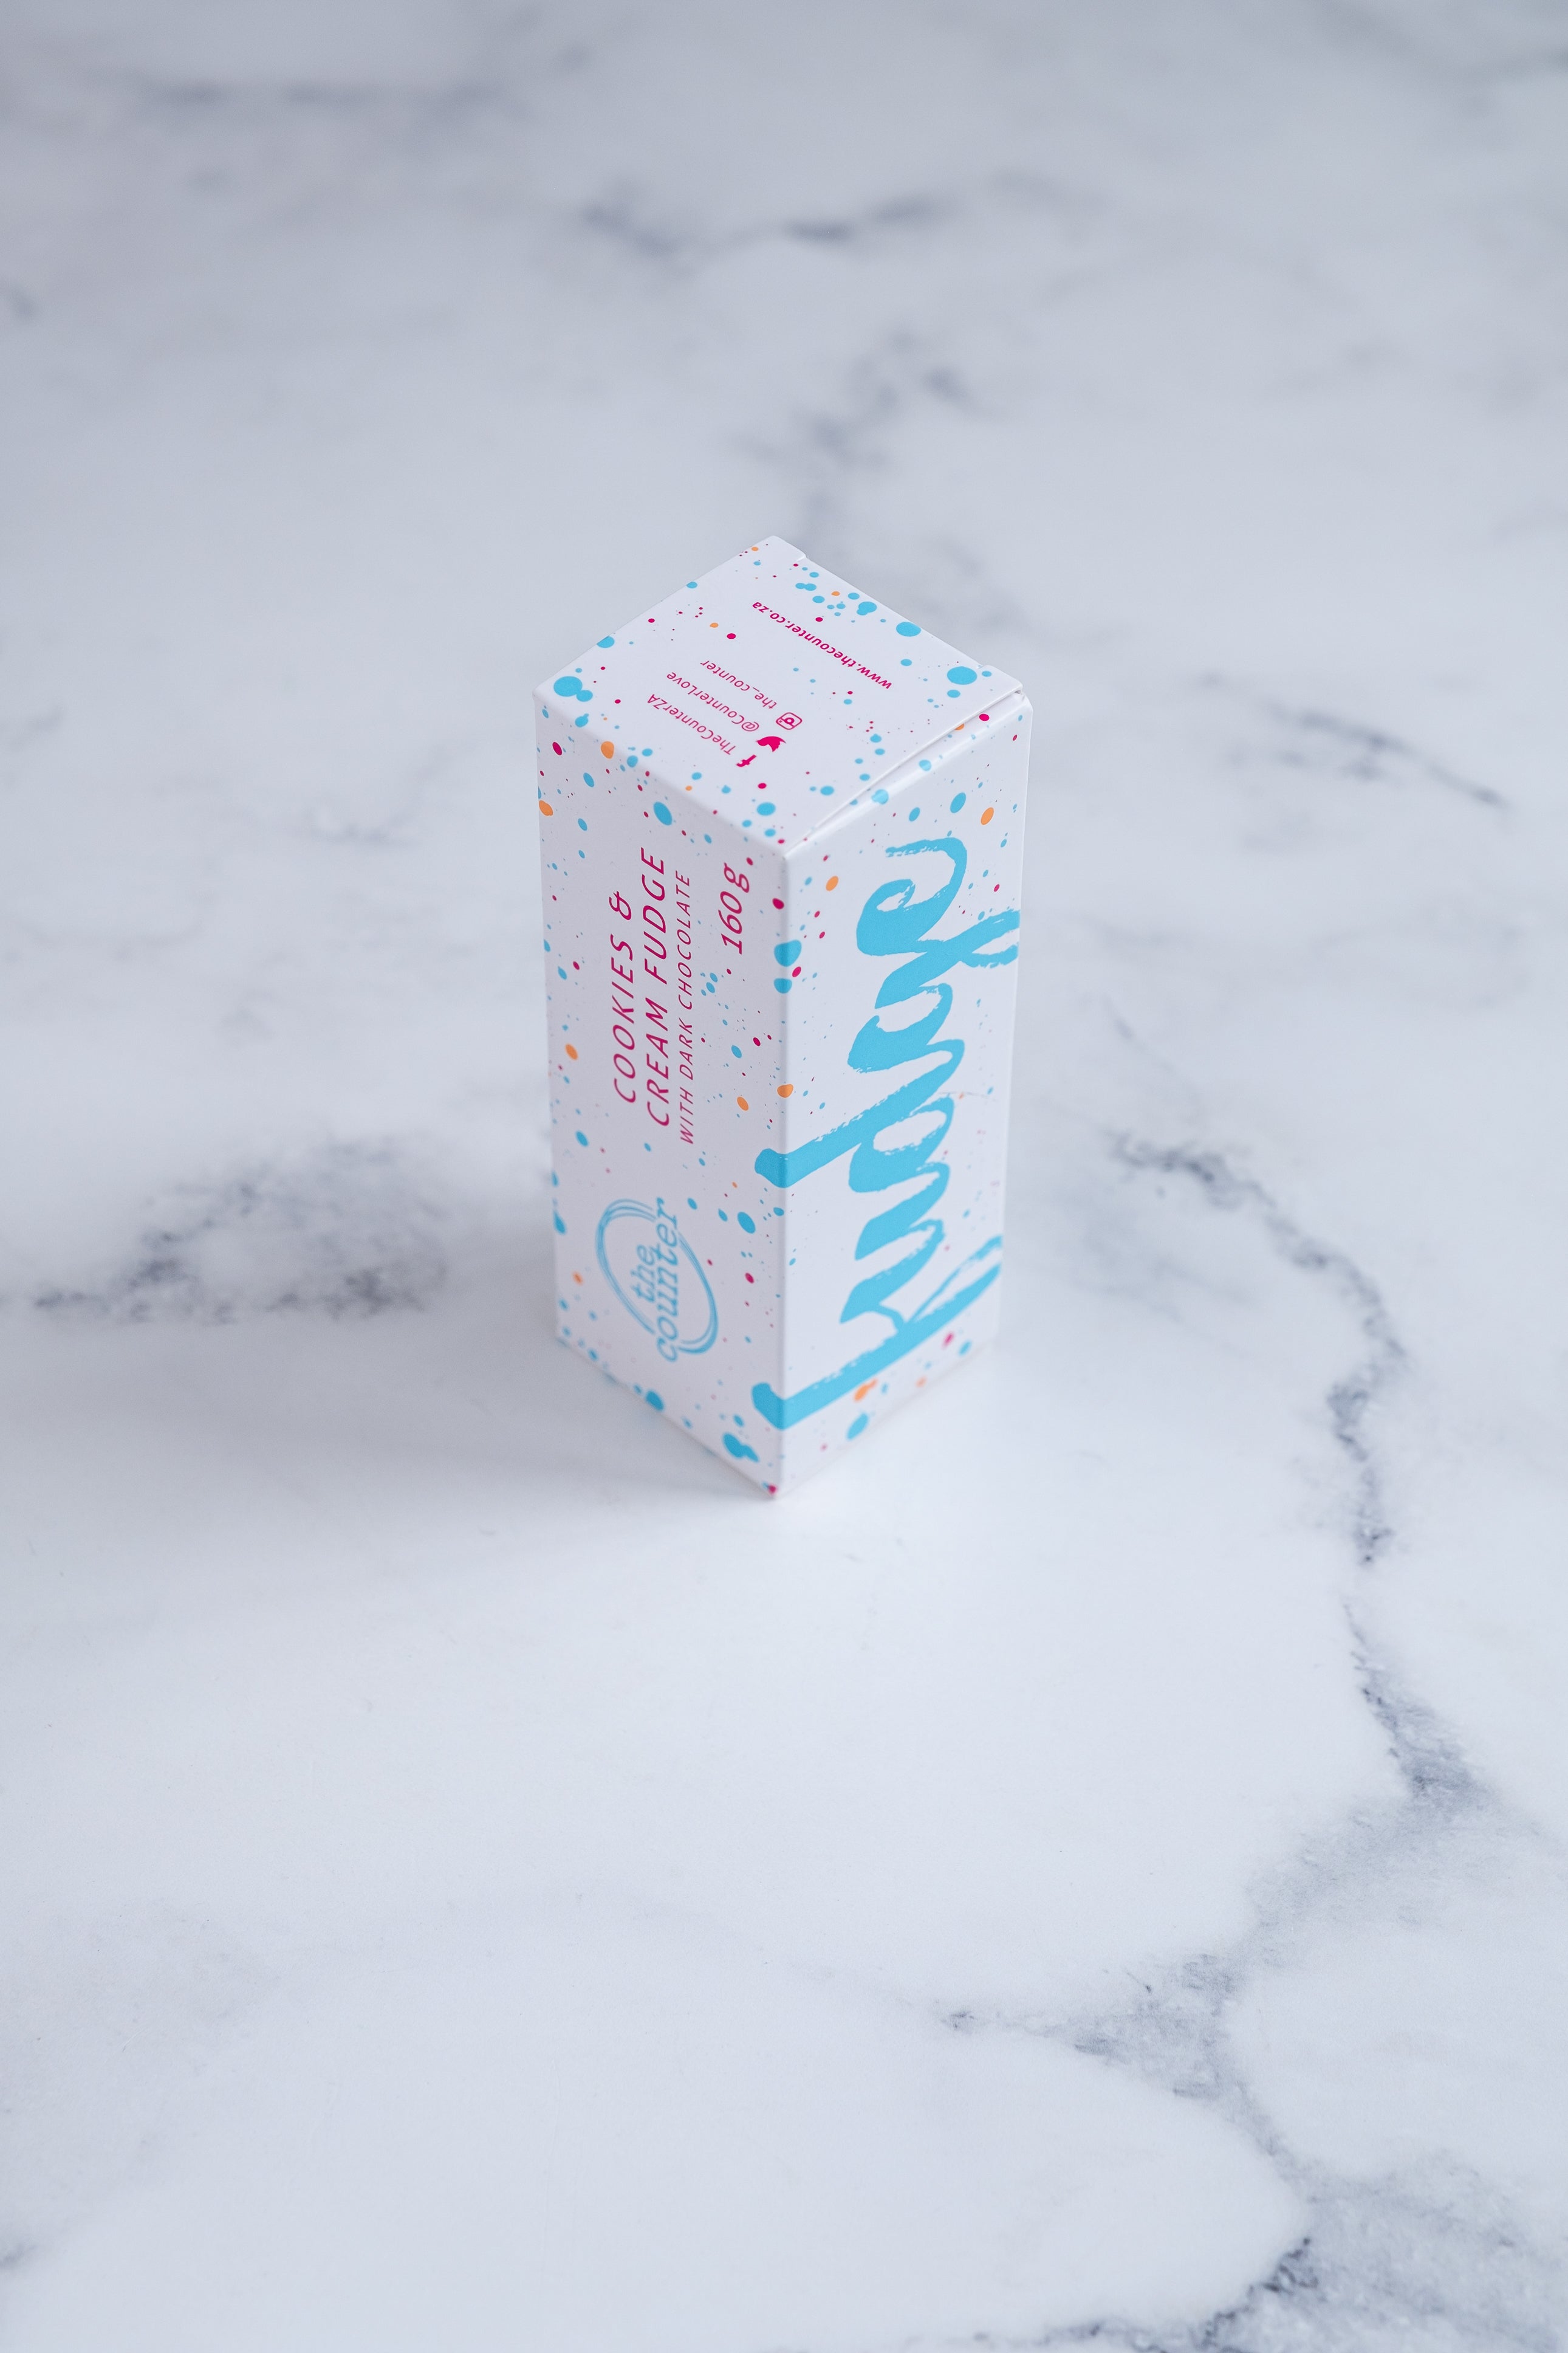 A white box stands upright on a neutral background. Large bright blue lettering states 'fudge' and is surrounded by bright blue and cerise pink paint splashes. A messy circled logo for The Counter and the words 'Cookies & Cream fudge with dark chocolate' are written in cerise pink block lettering.